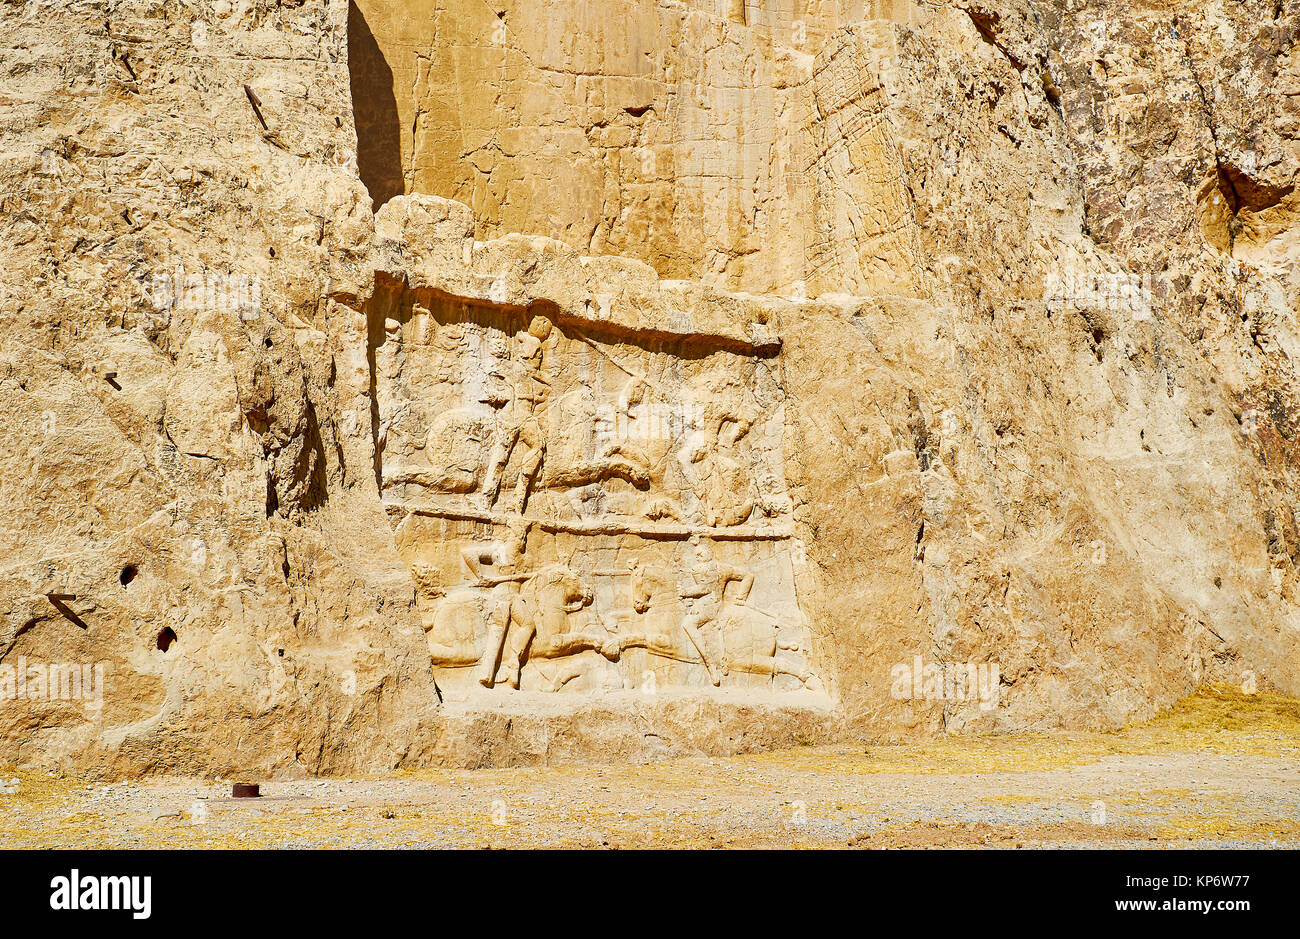 The panels with equestrian reliefs, carved in Hossein Mount, Naqsh-e Rustam Necropolis, Iran. Stock Photo